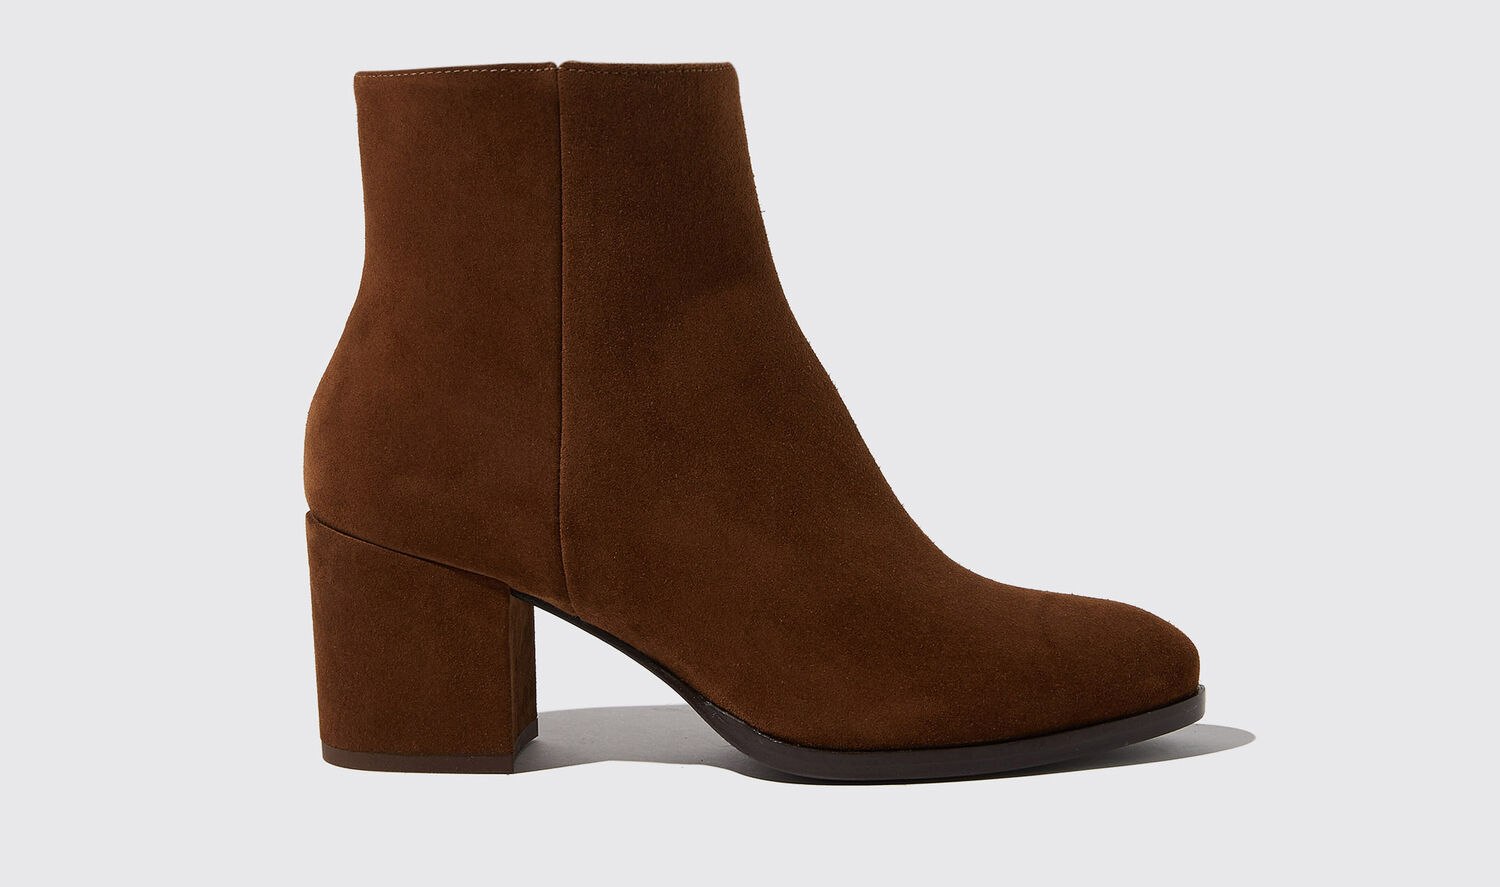 Scarosso Boots Costanza Tabacco Scamosciata Suede Leather In Tobacco - Suede